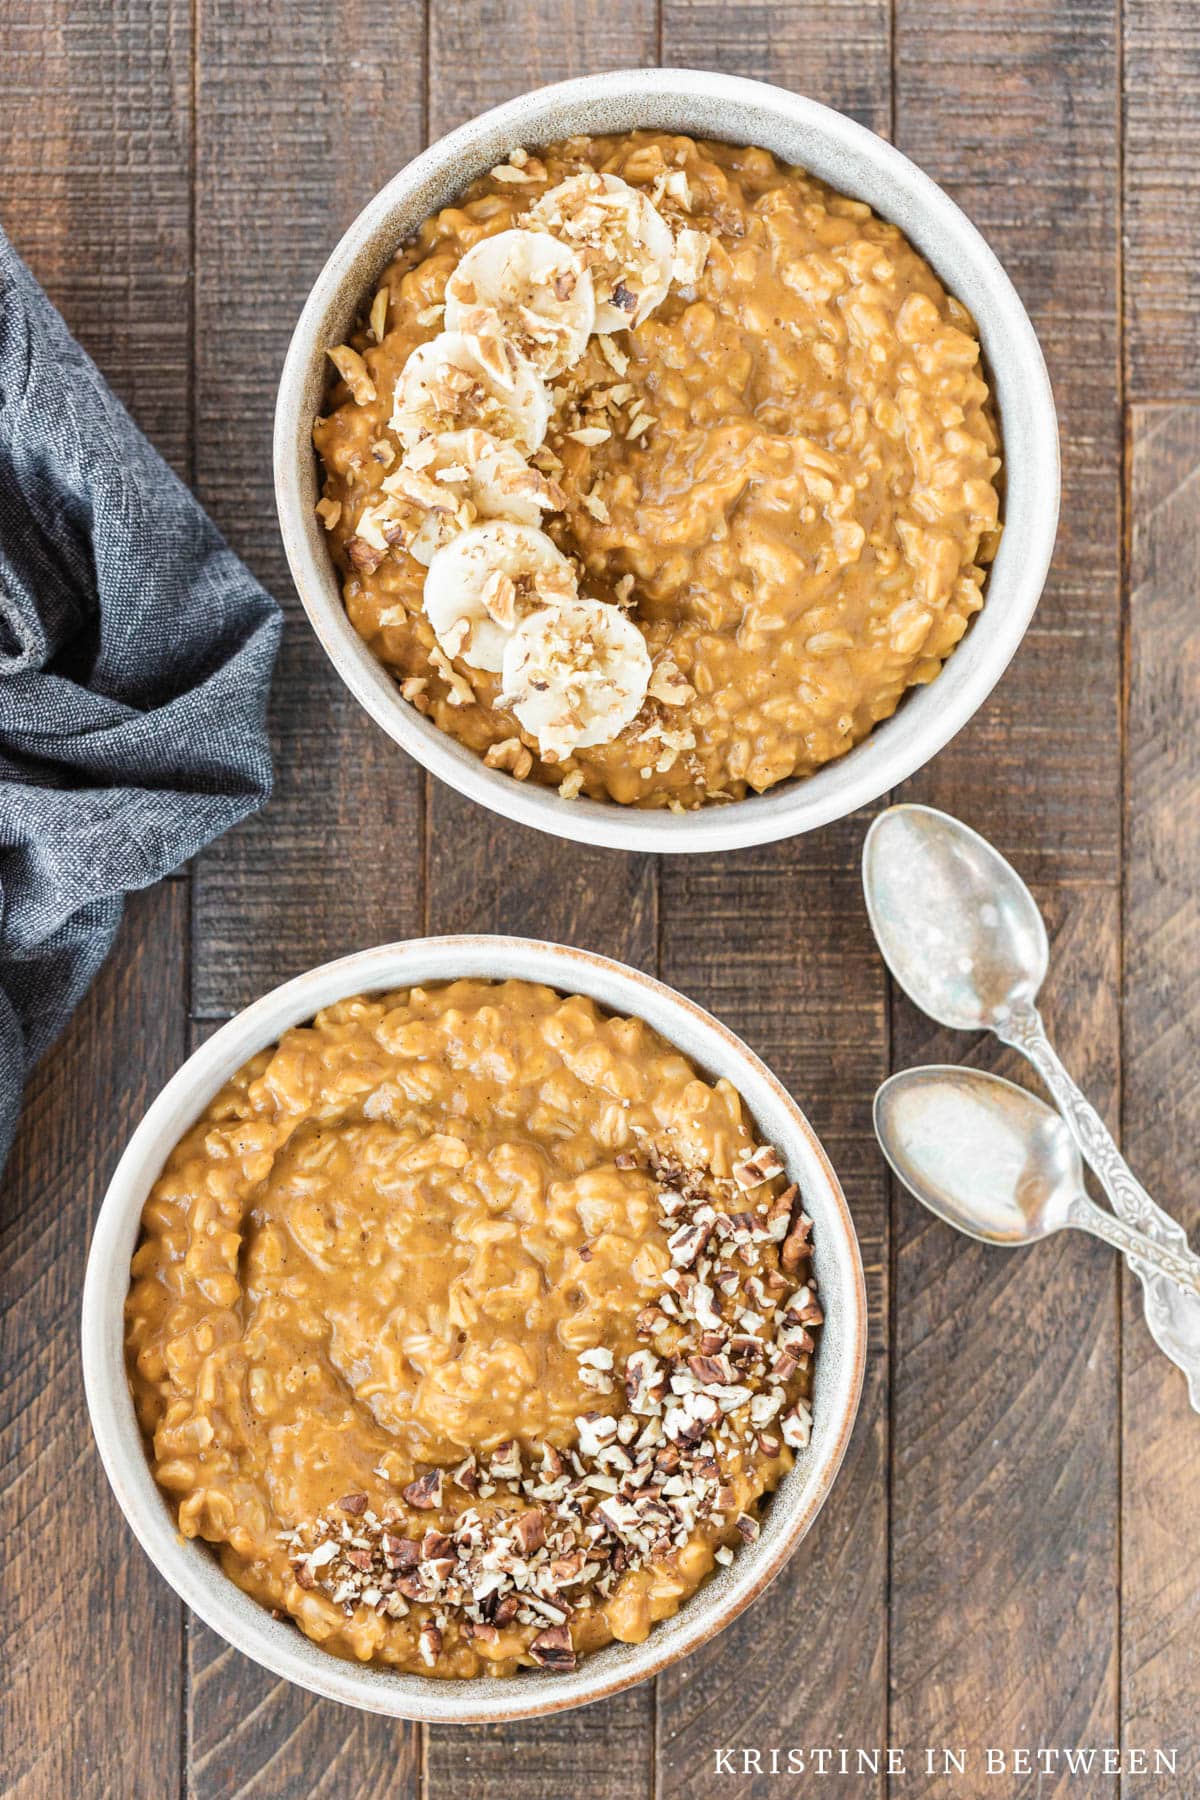 Two bowls of oatmeal, one with pecans and one with bananas and walnuts on top.